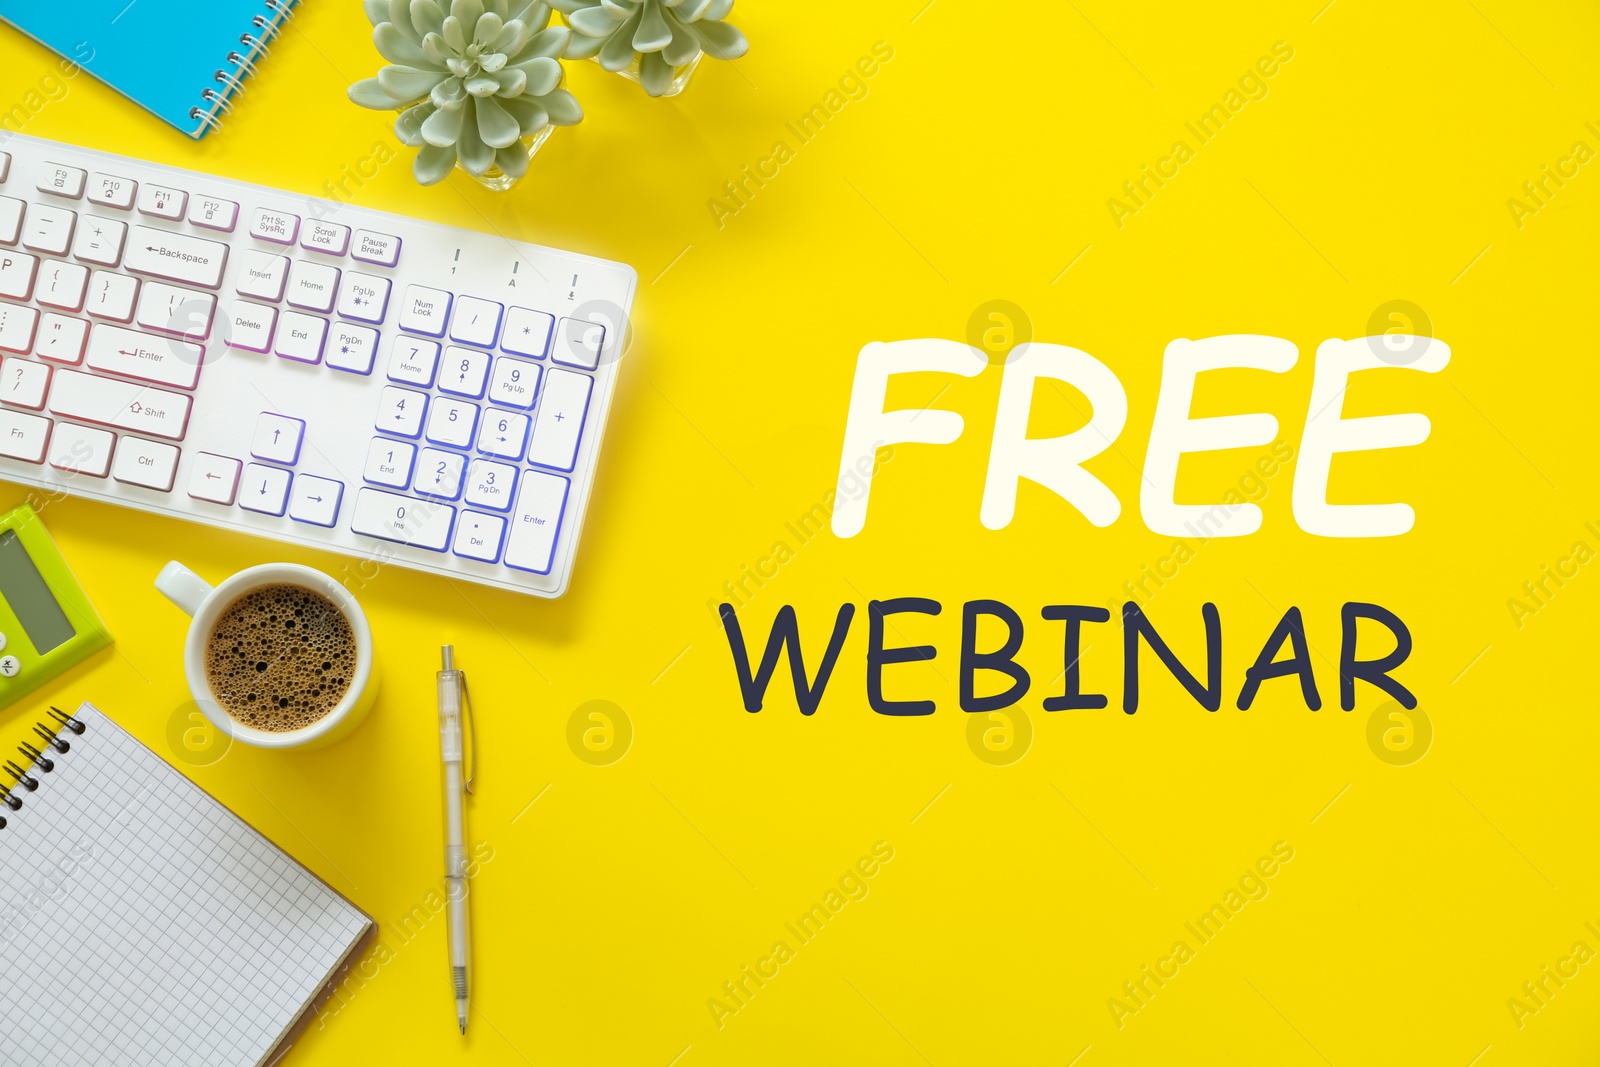 Image of FREE WEBINAR. Flat lay composition with computer keyboard and stationery on yellow background, flat lay